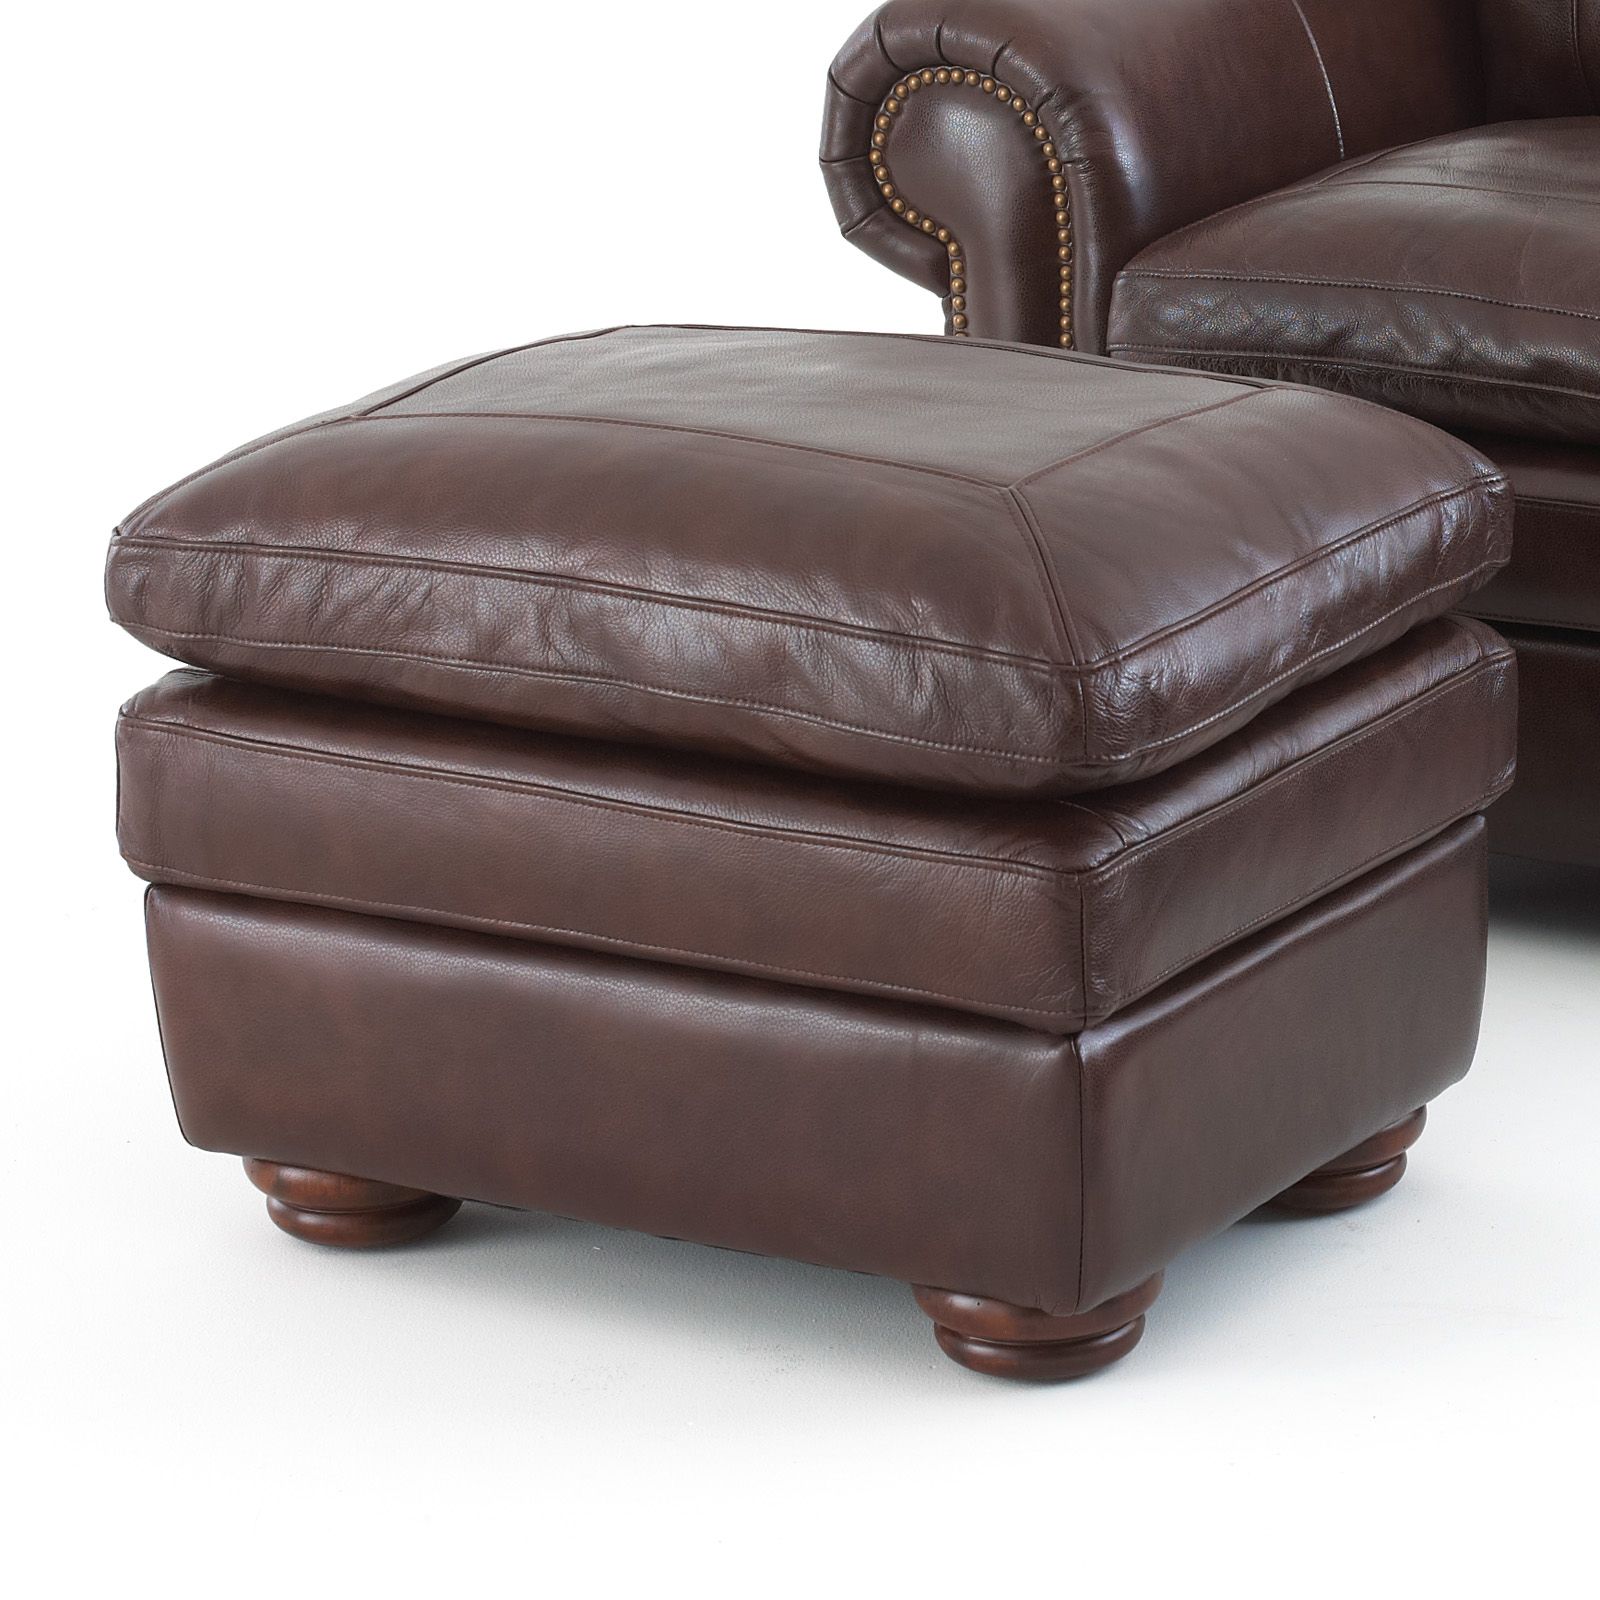 Weathered Silver Leather Hide Pouf Ottomans Regarding Popular Steve Silver Yosemite Leather Ottoman – Chestnut At Hayneedle (View 10 of 10)